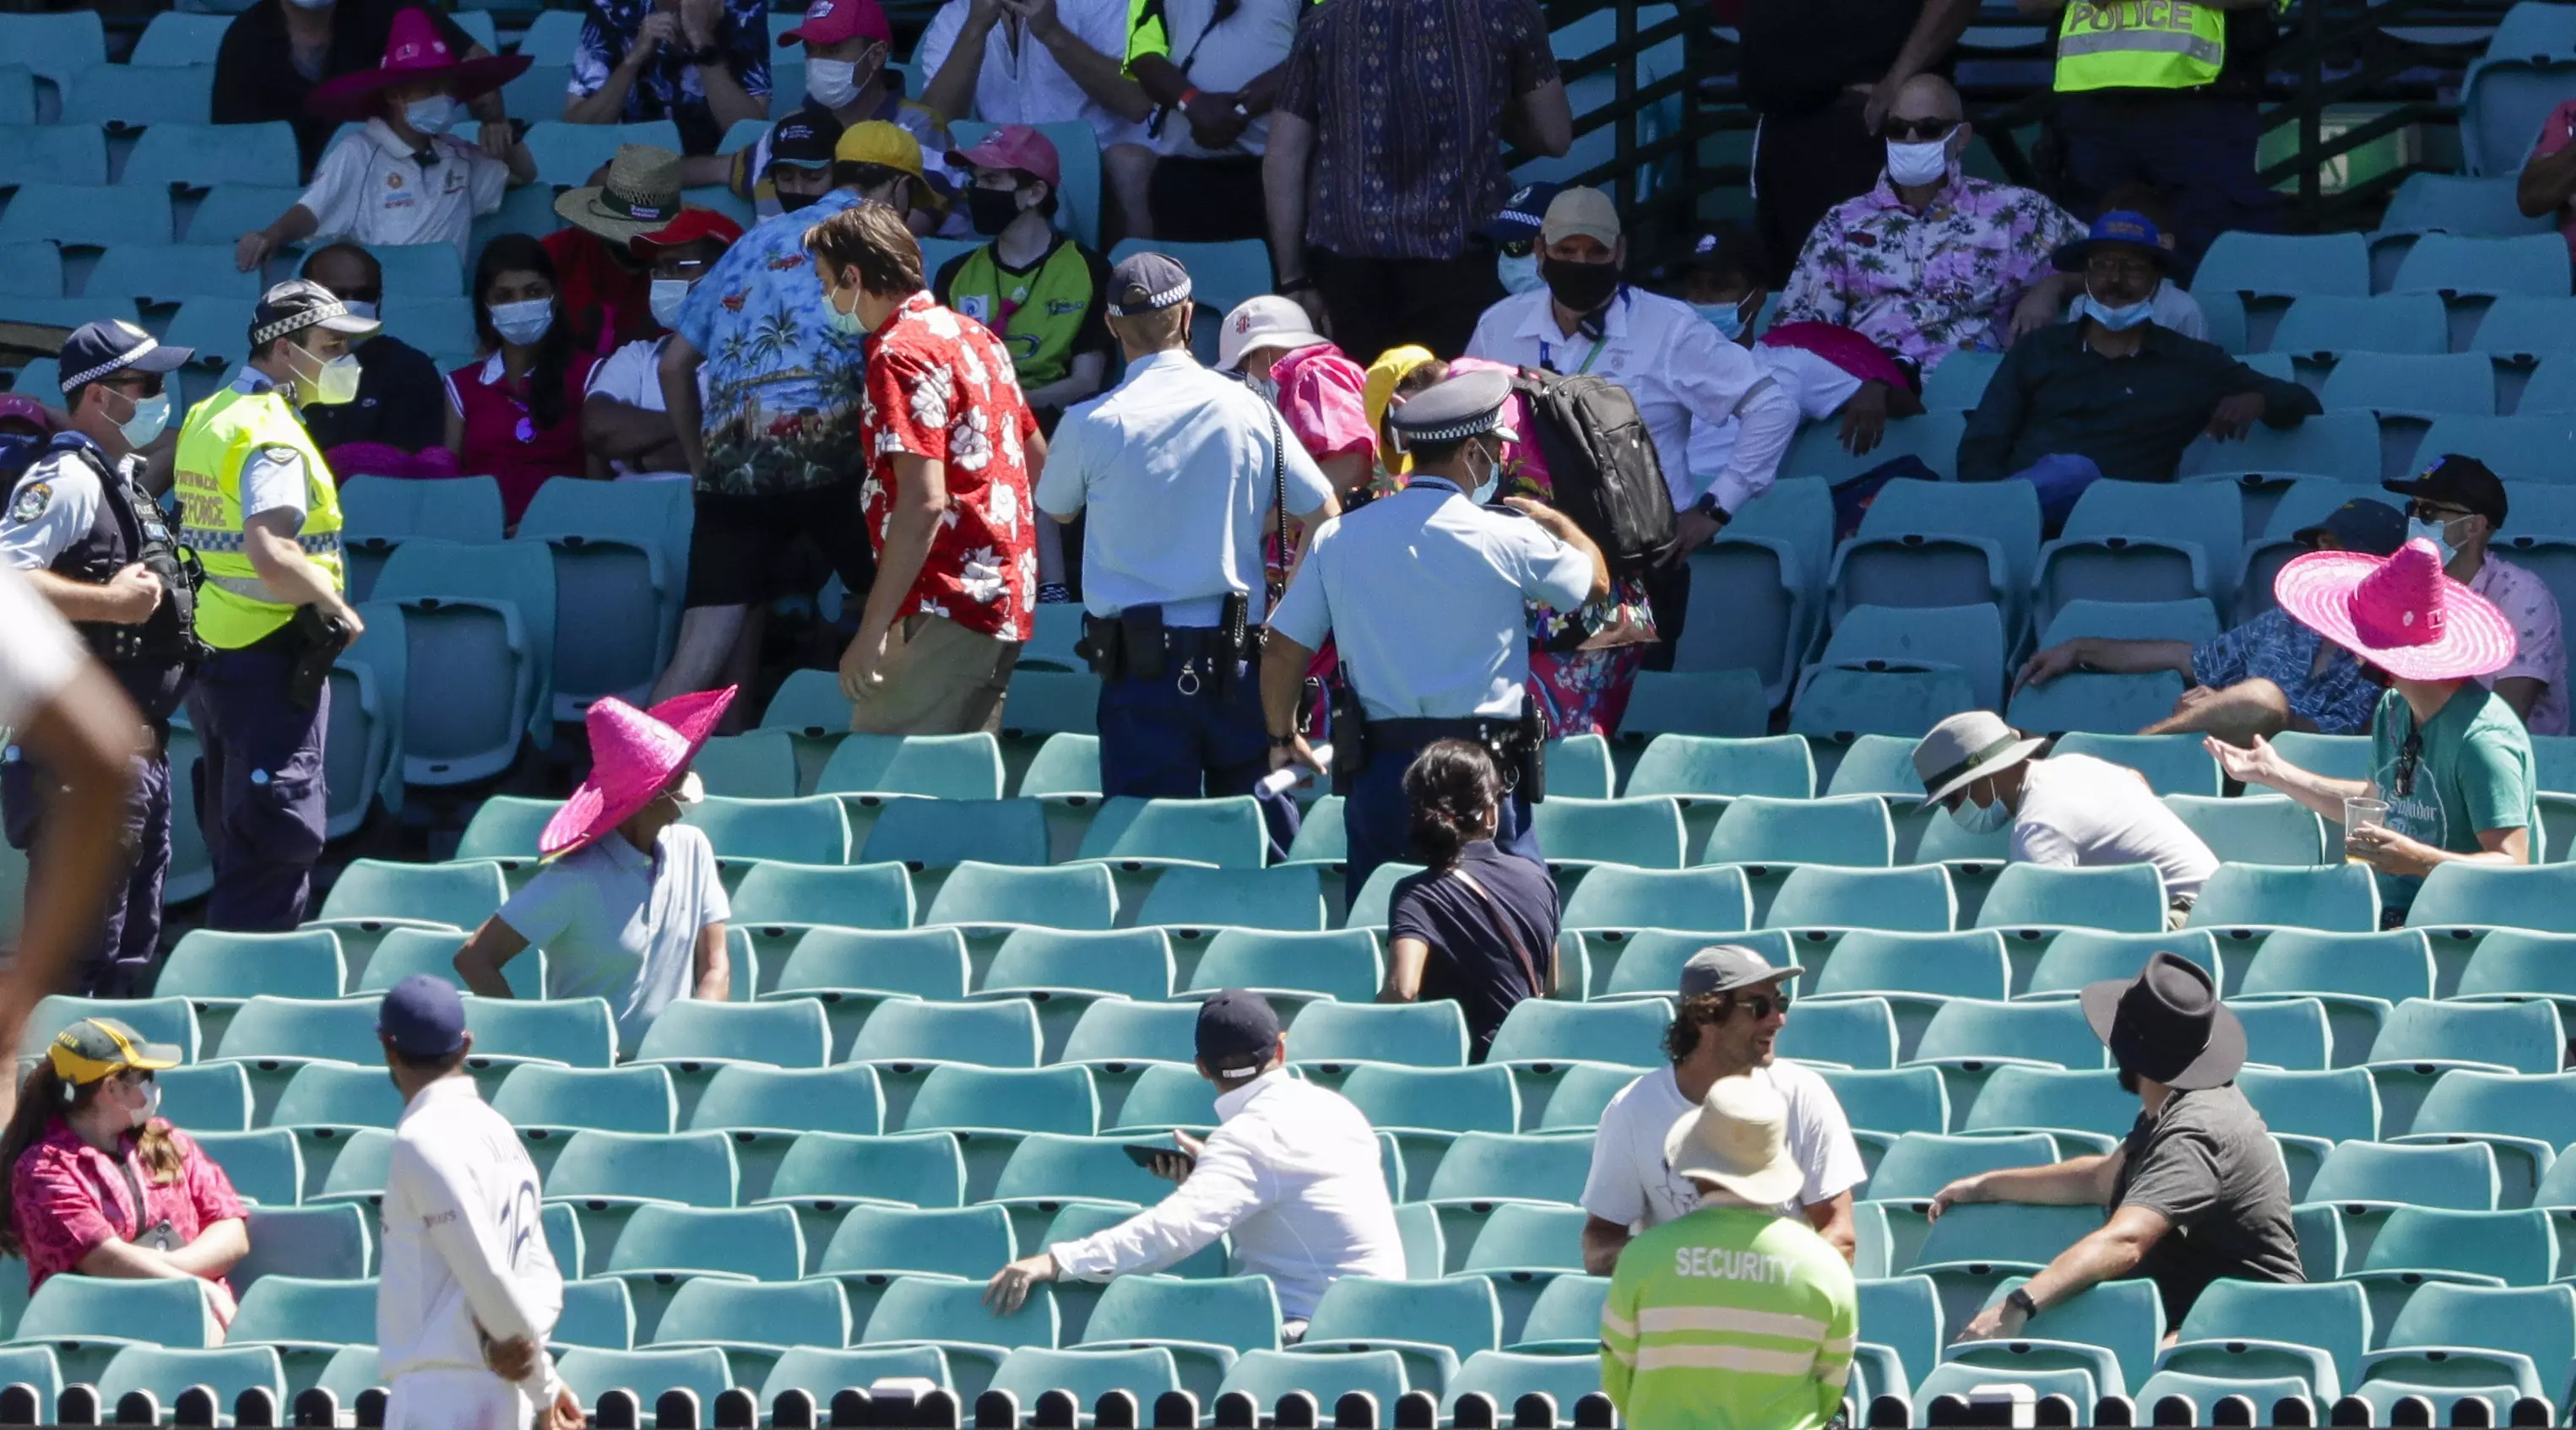 Police escorted fans out of the SCG.